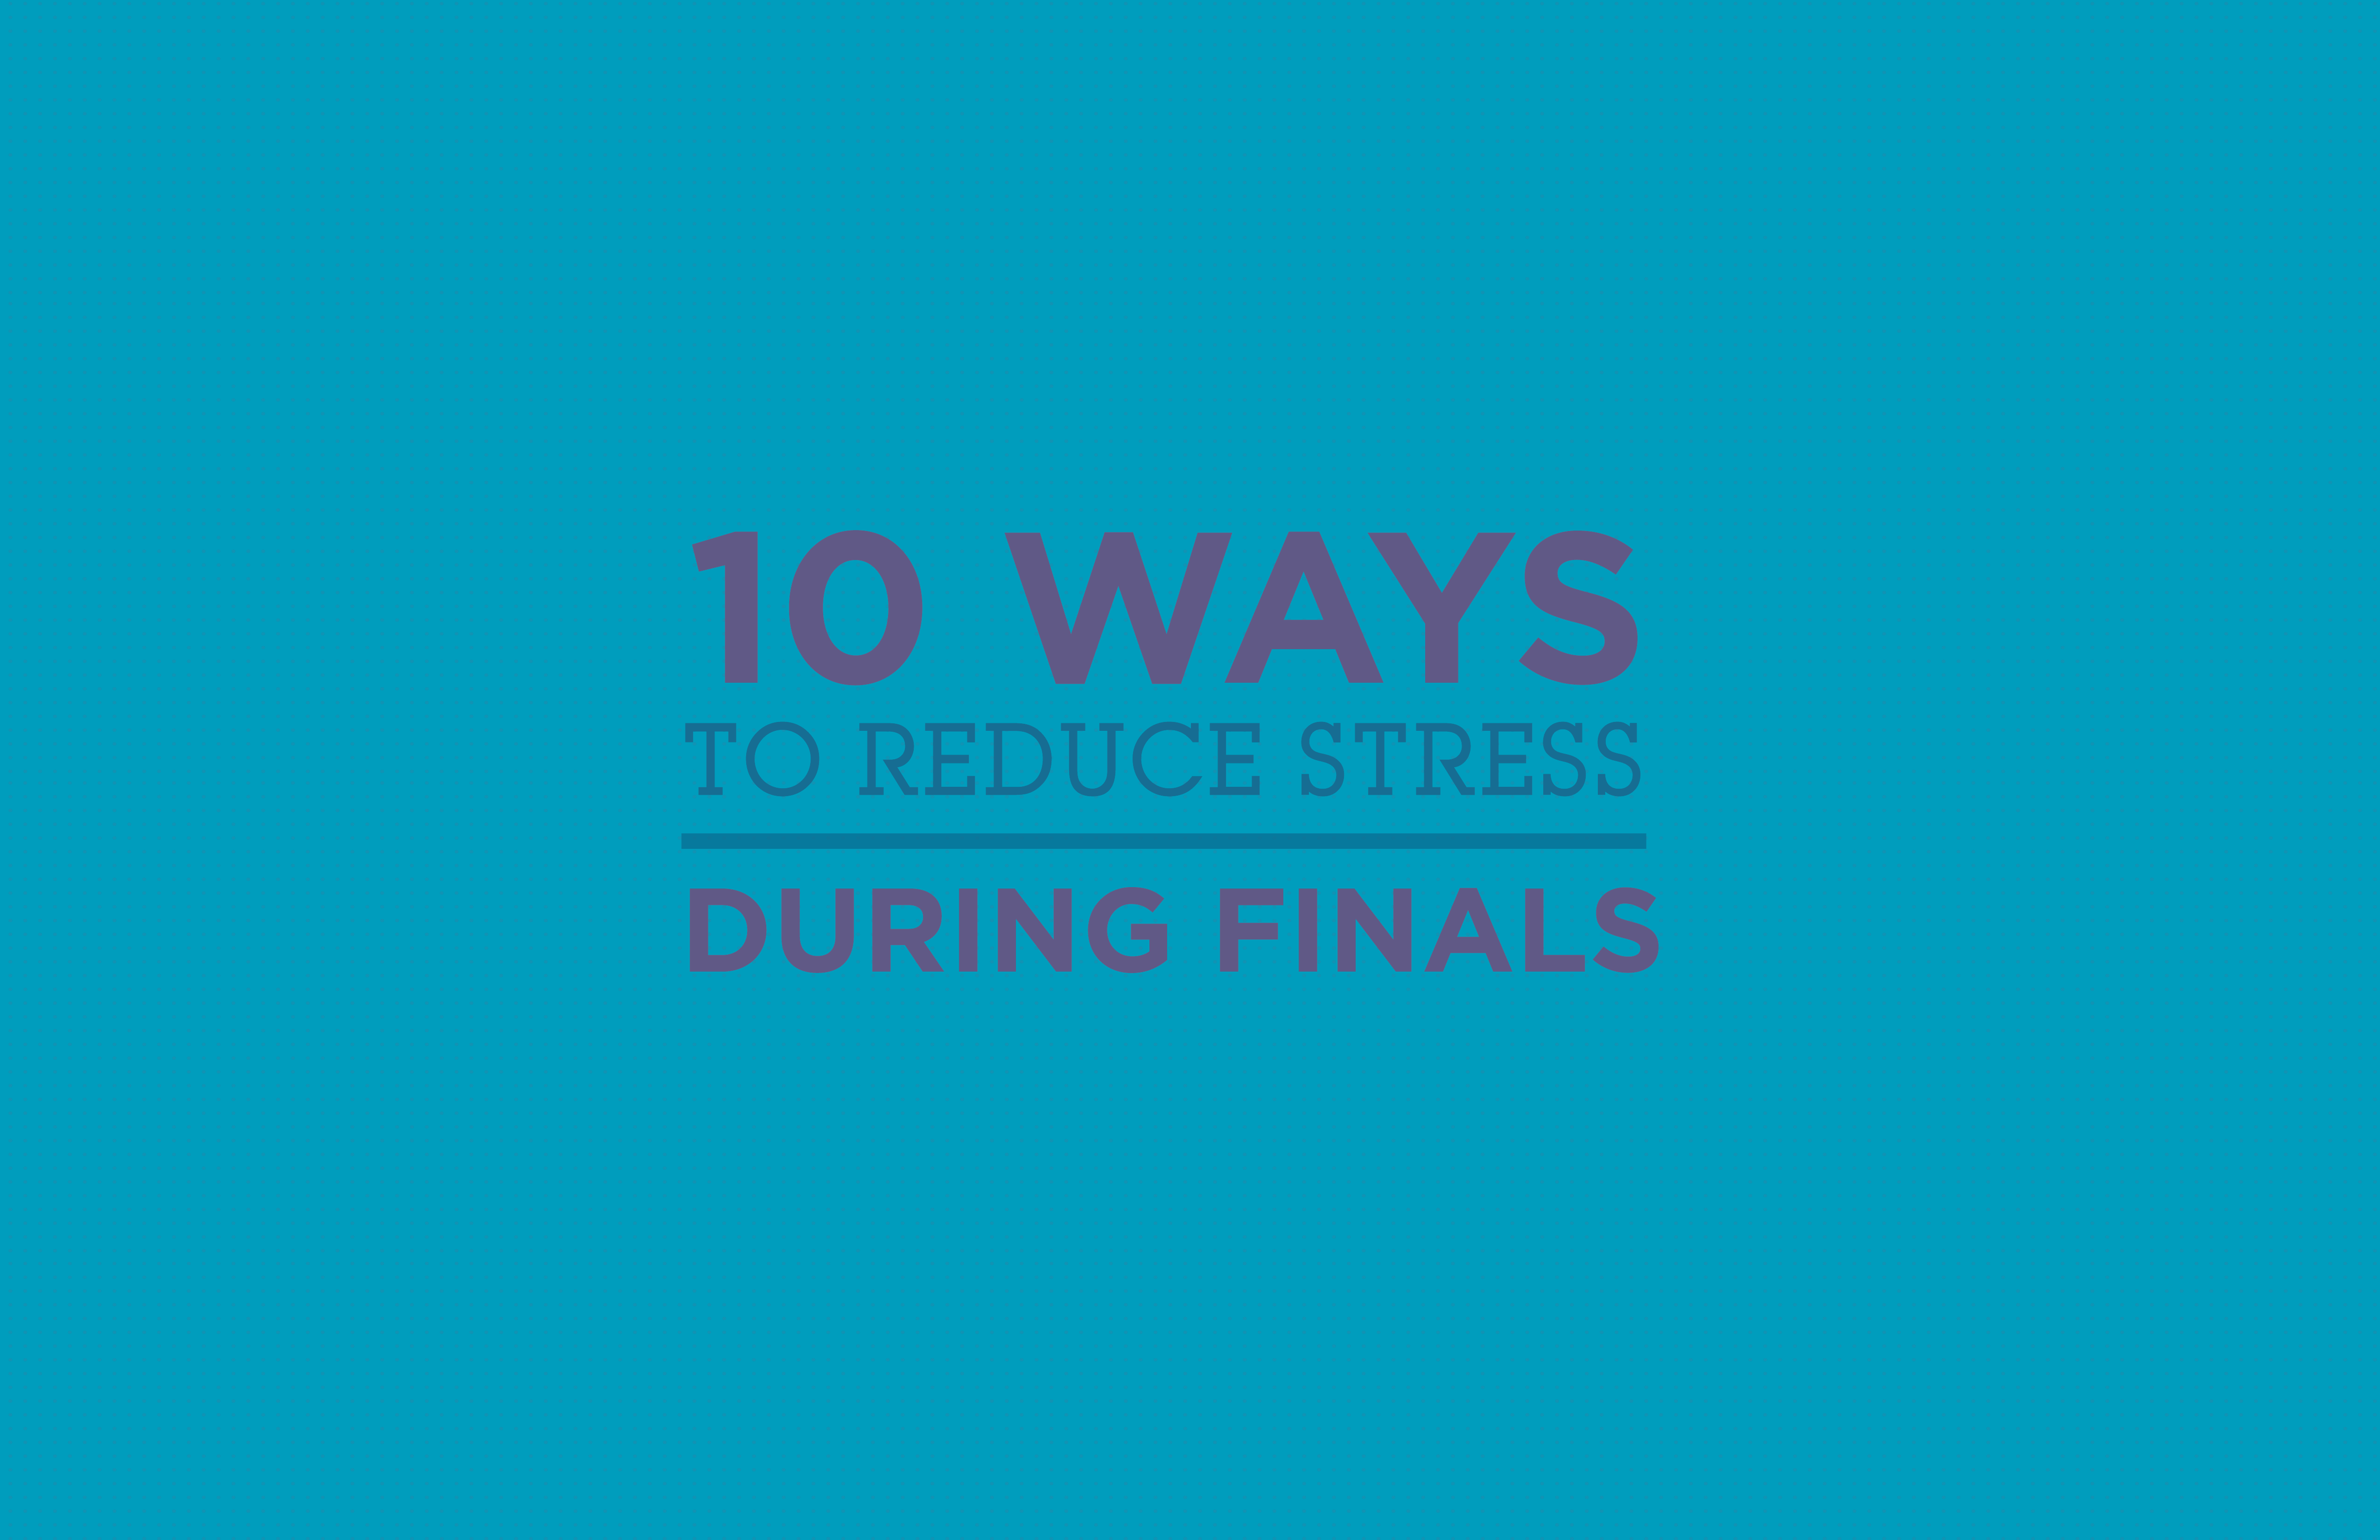 10 ways to reduce stress during finals